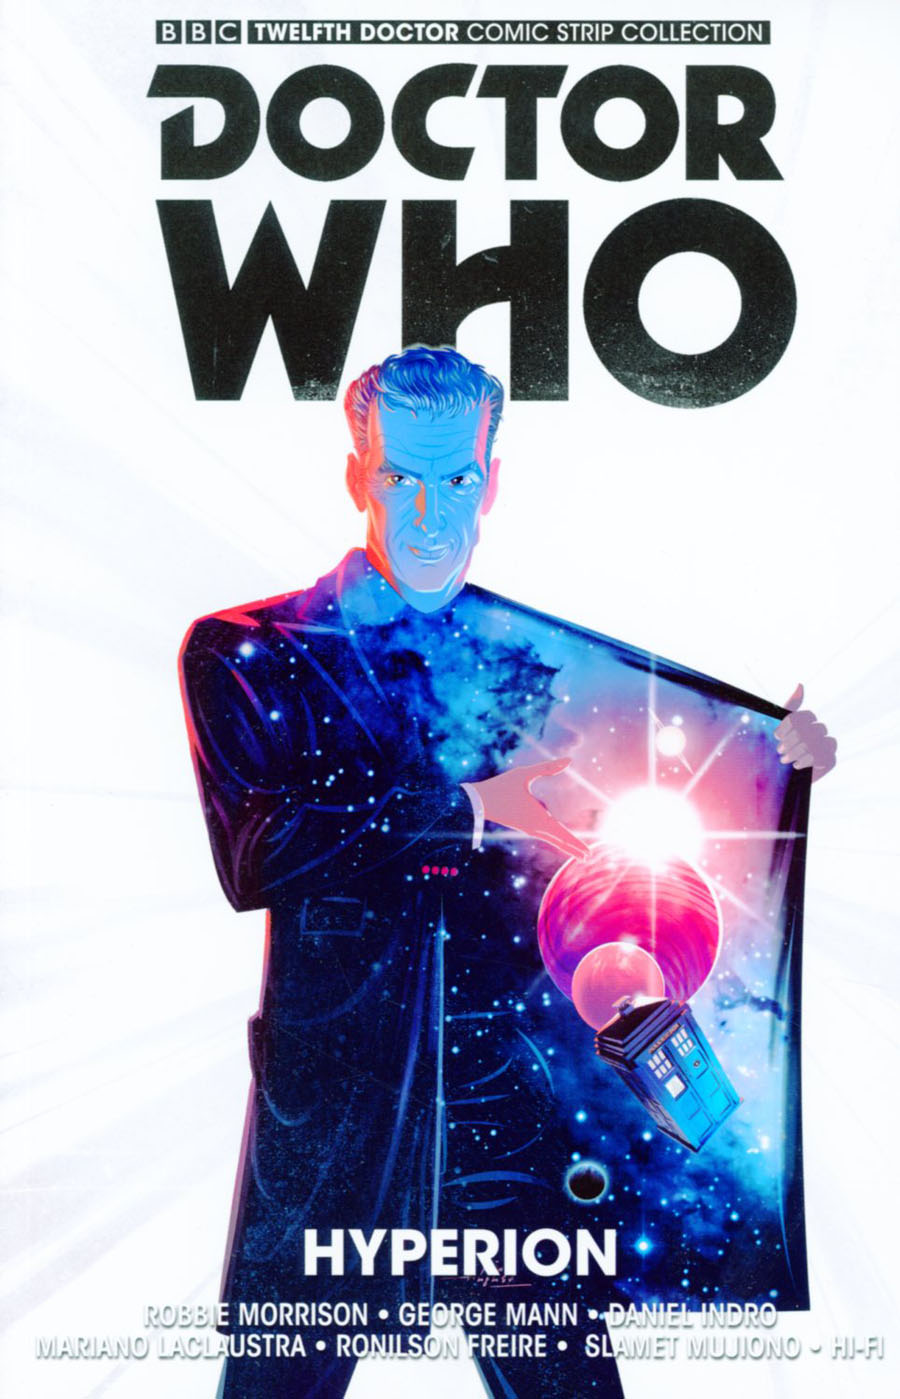 Doctor Who 12th Doctor Vol 3 Hyperion TP